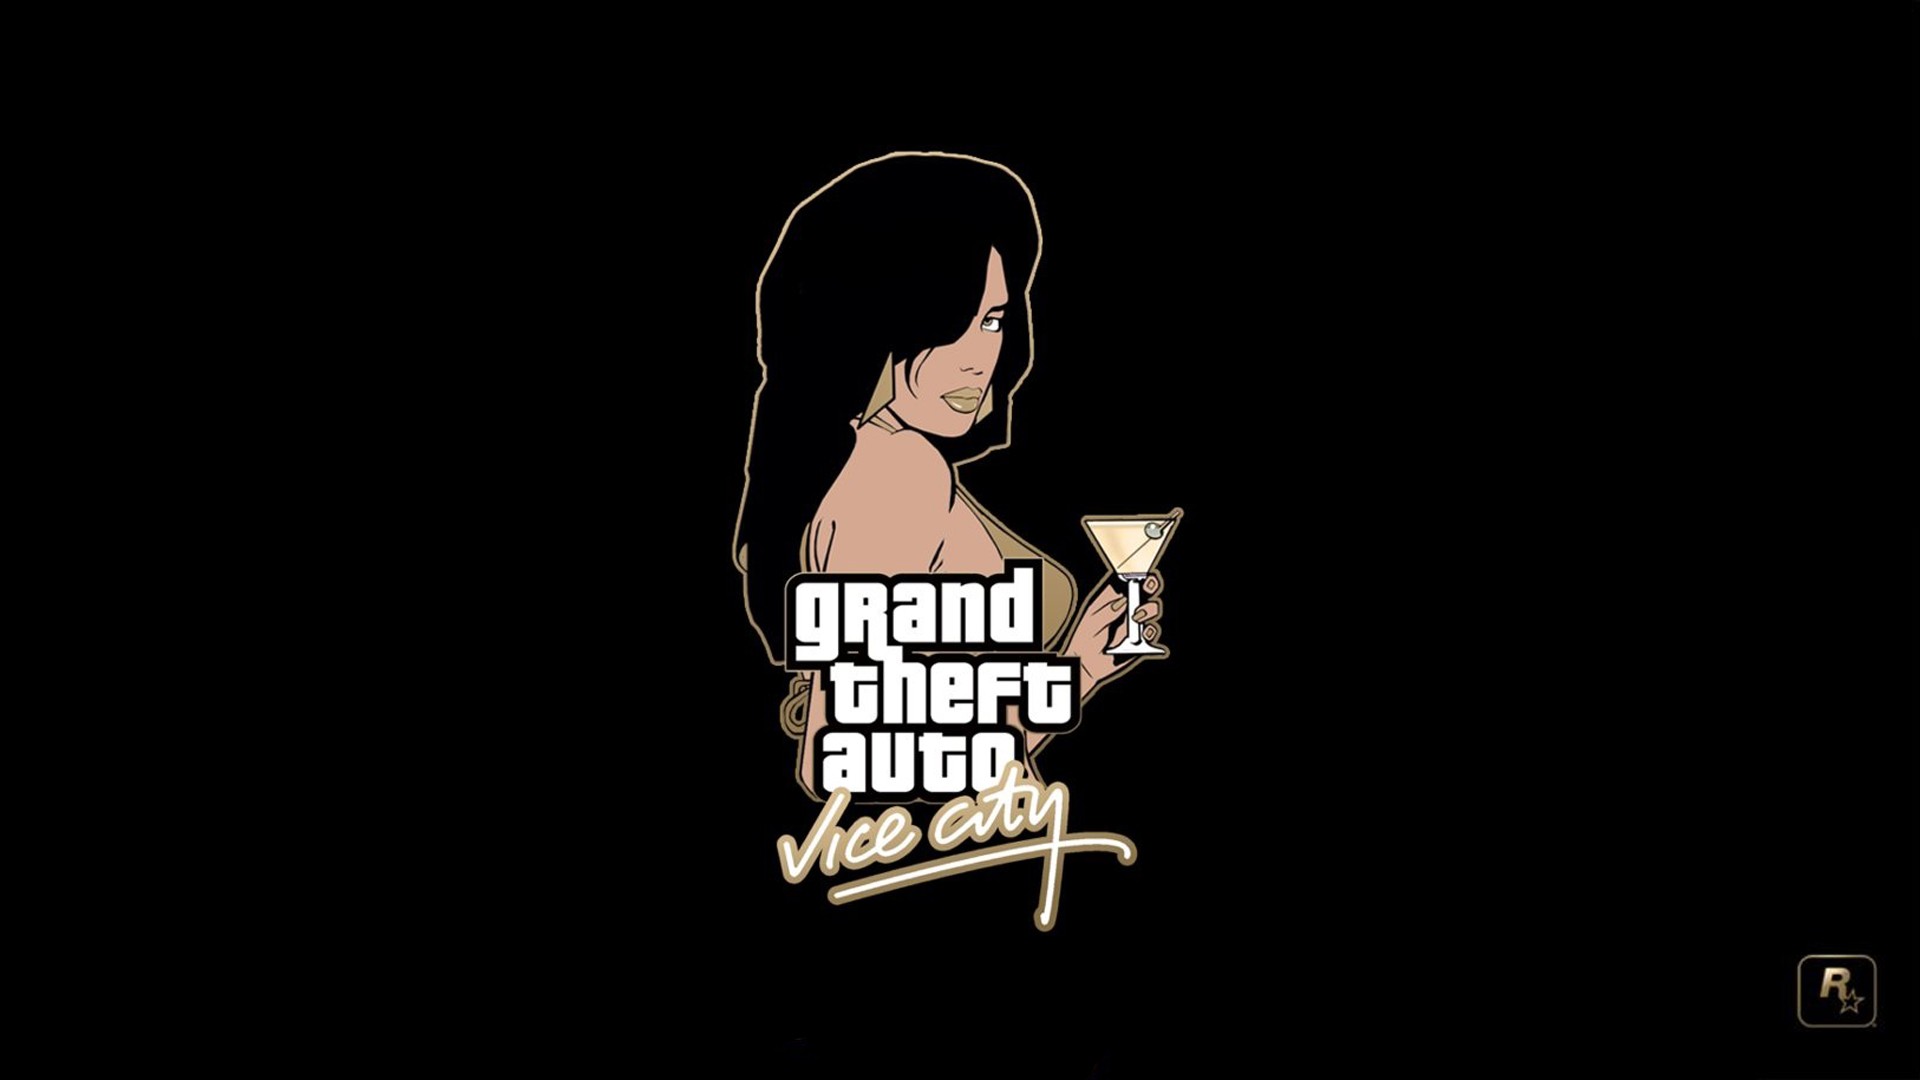 General 1920x1080 Grand Theft Auto: Vice City Rockstar Games PlayStation 2 video games Grand Theft Auto video game girls PC gaming hair over one eye women black background simple background logo